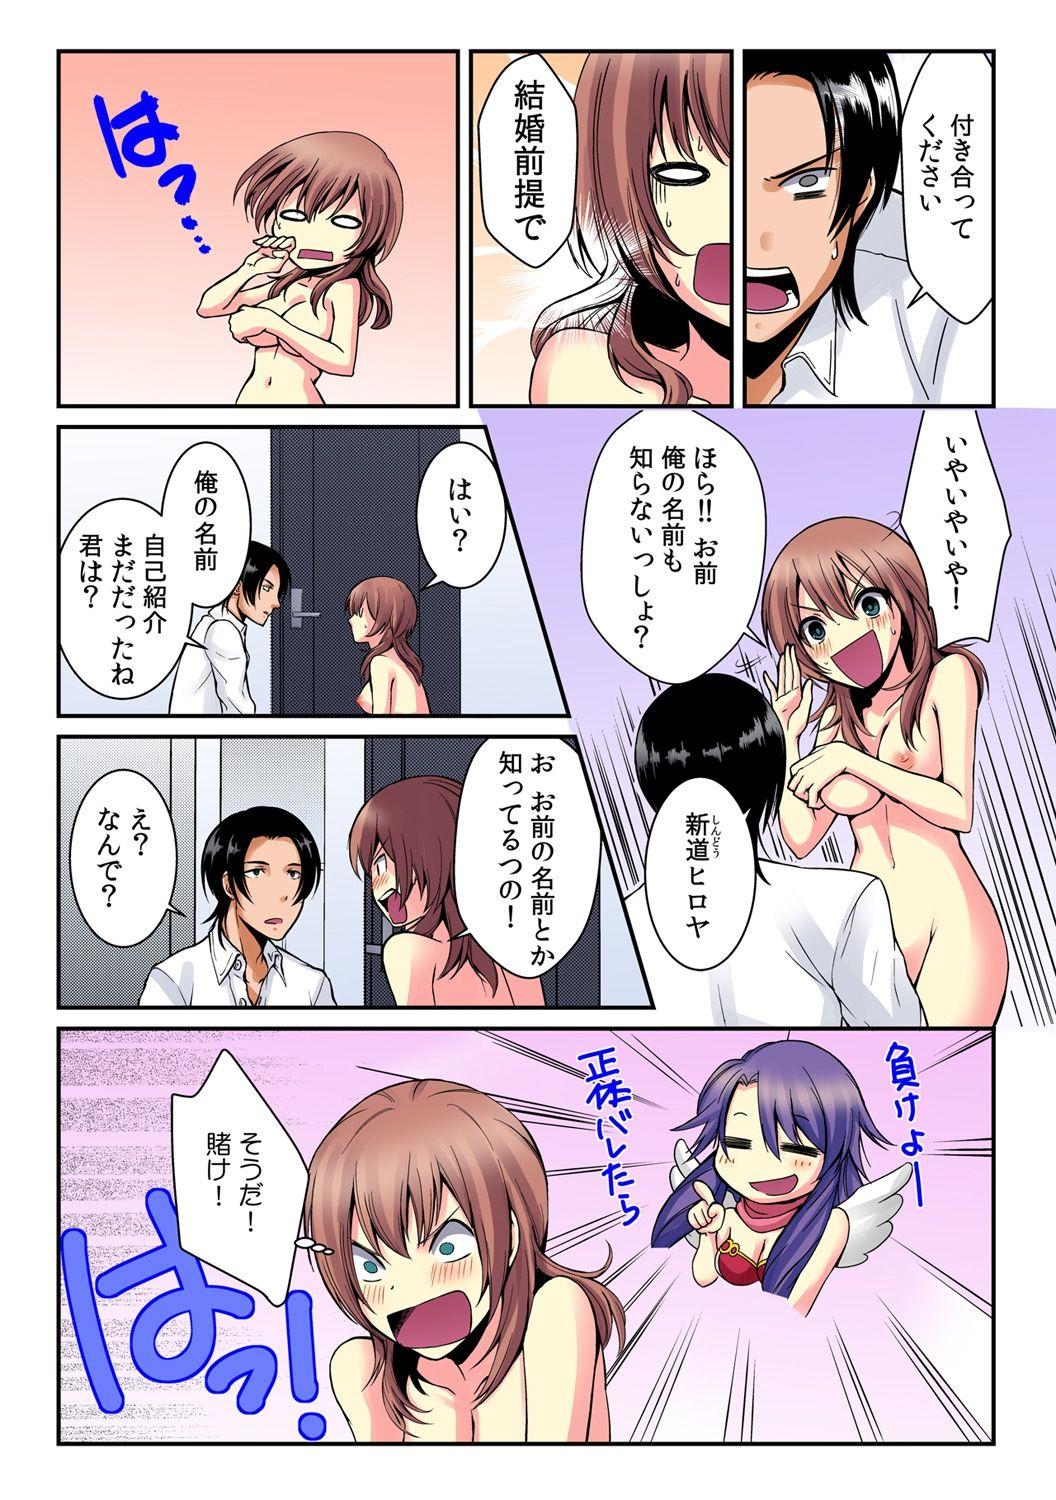 [Akagi Gijou / Akahige] I became a girl- and I definitely can't let anyone find out! (Full color) 1 22